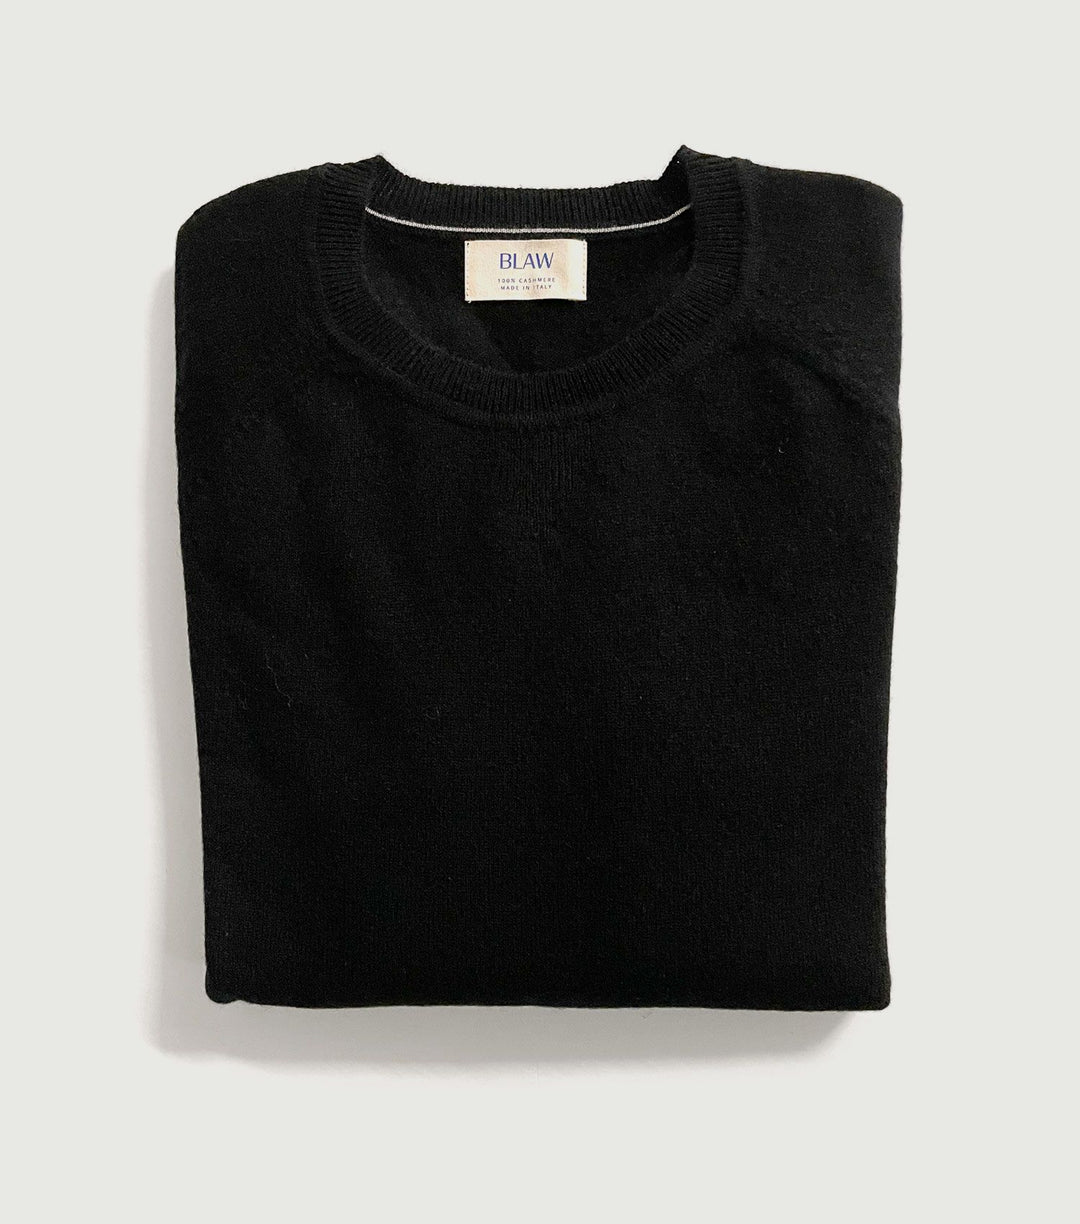 100% Cashmere Sweater Fleece "Made in Italy" Black - BLAW